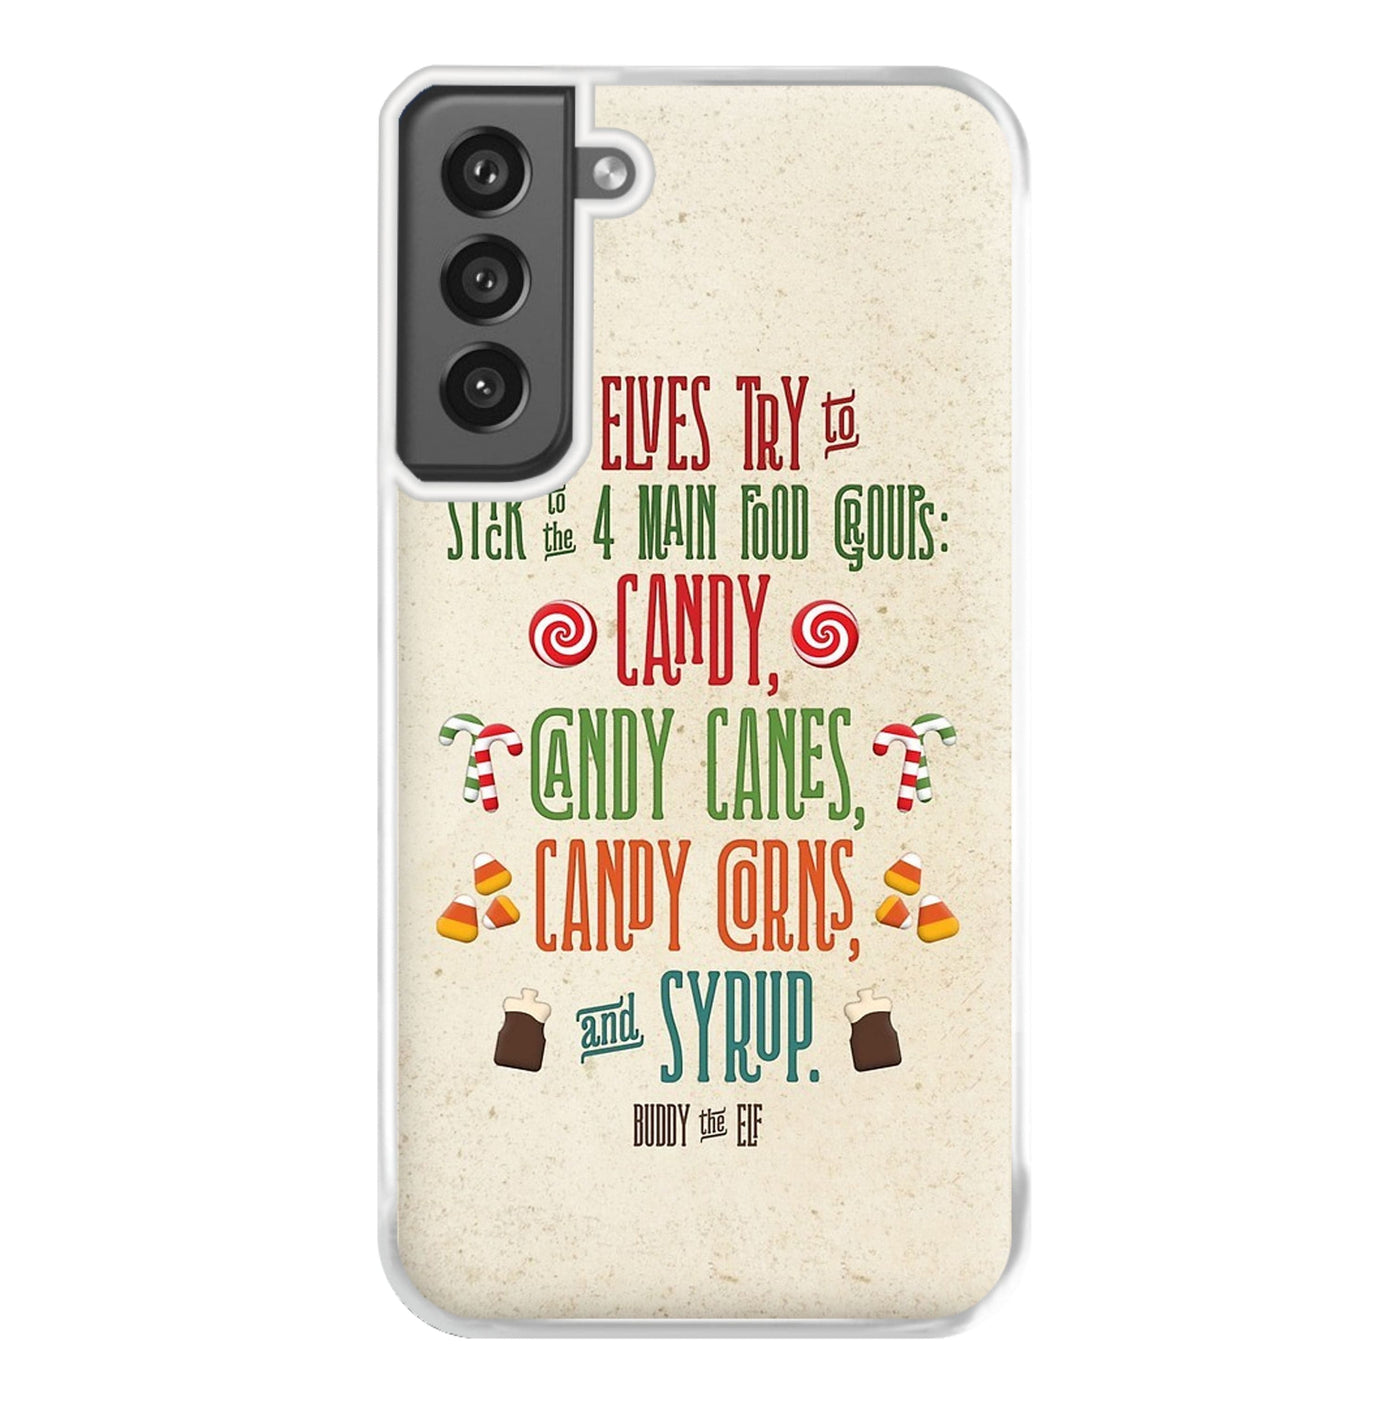 The Four Main Food Groups - Buddy The Elf Phone Case